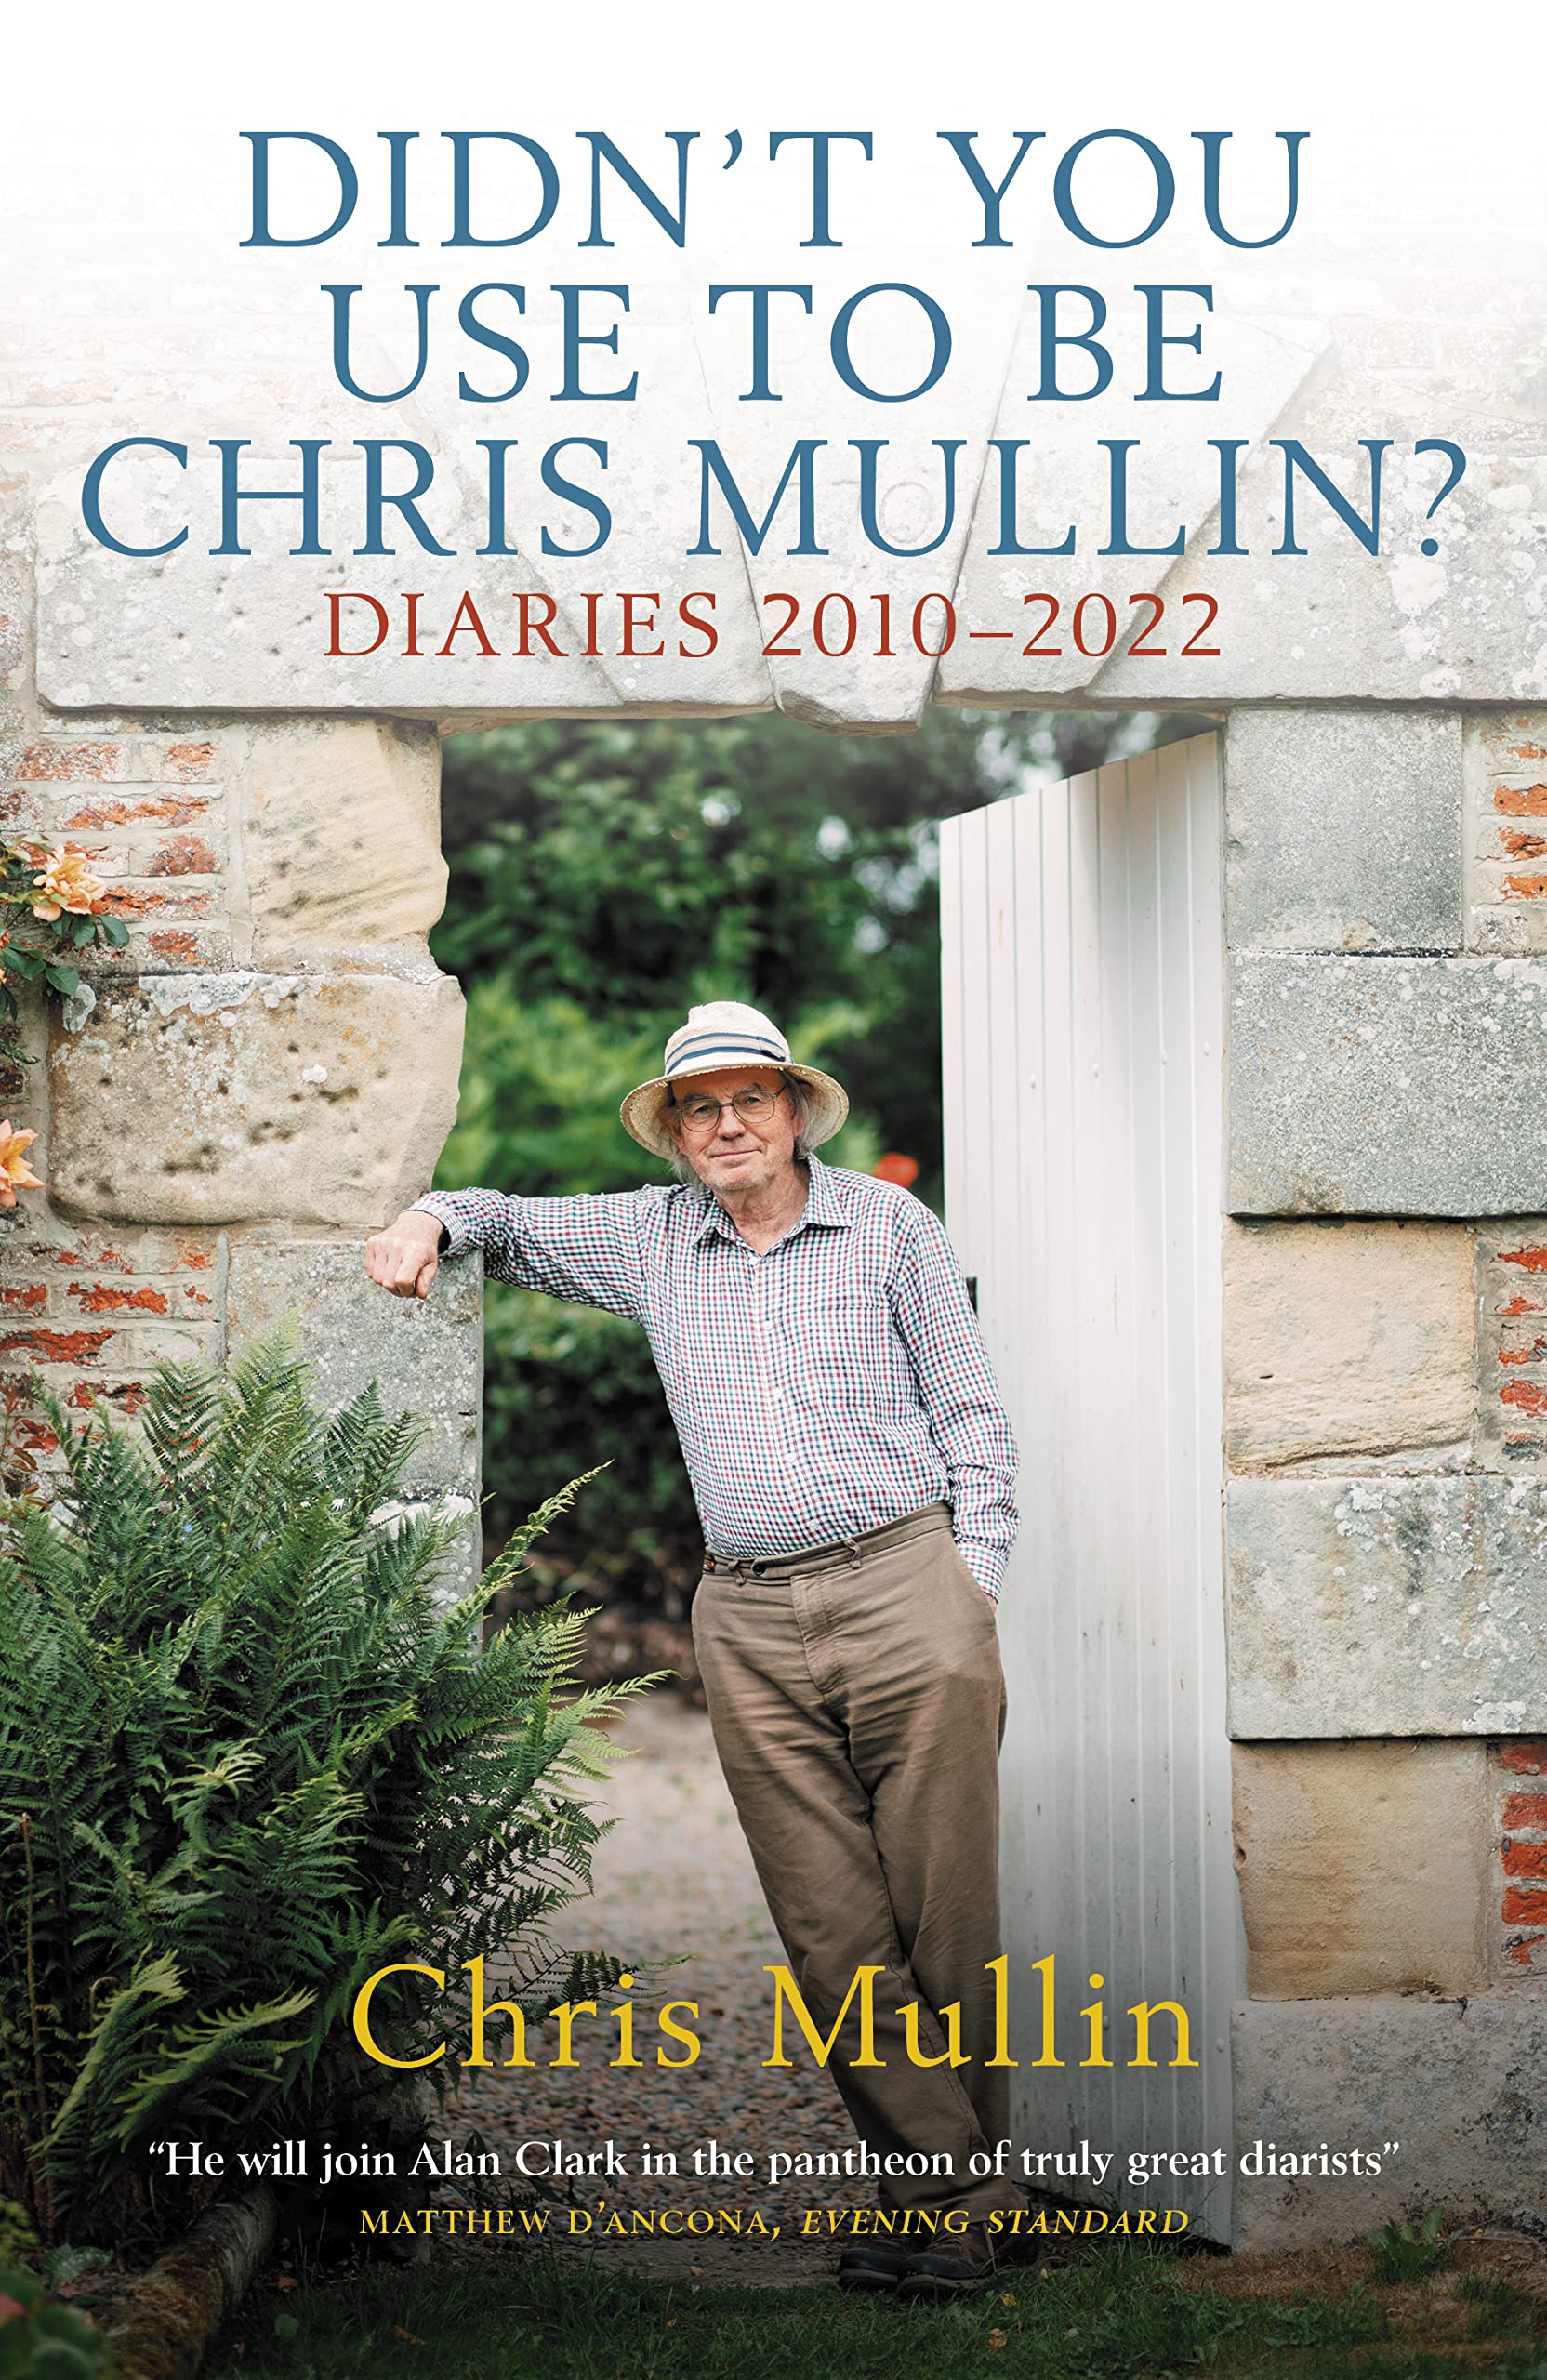 Didn't_you_use_to_be_Chris_Mullin_diaries_2010-2022_front cover